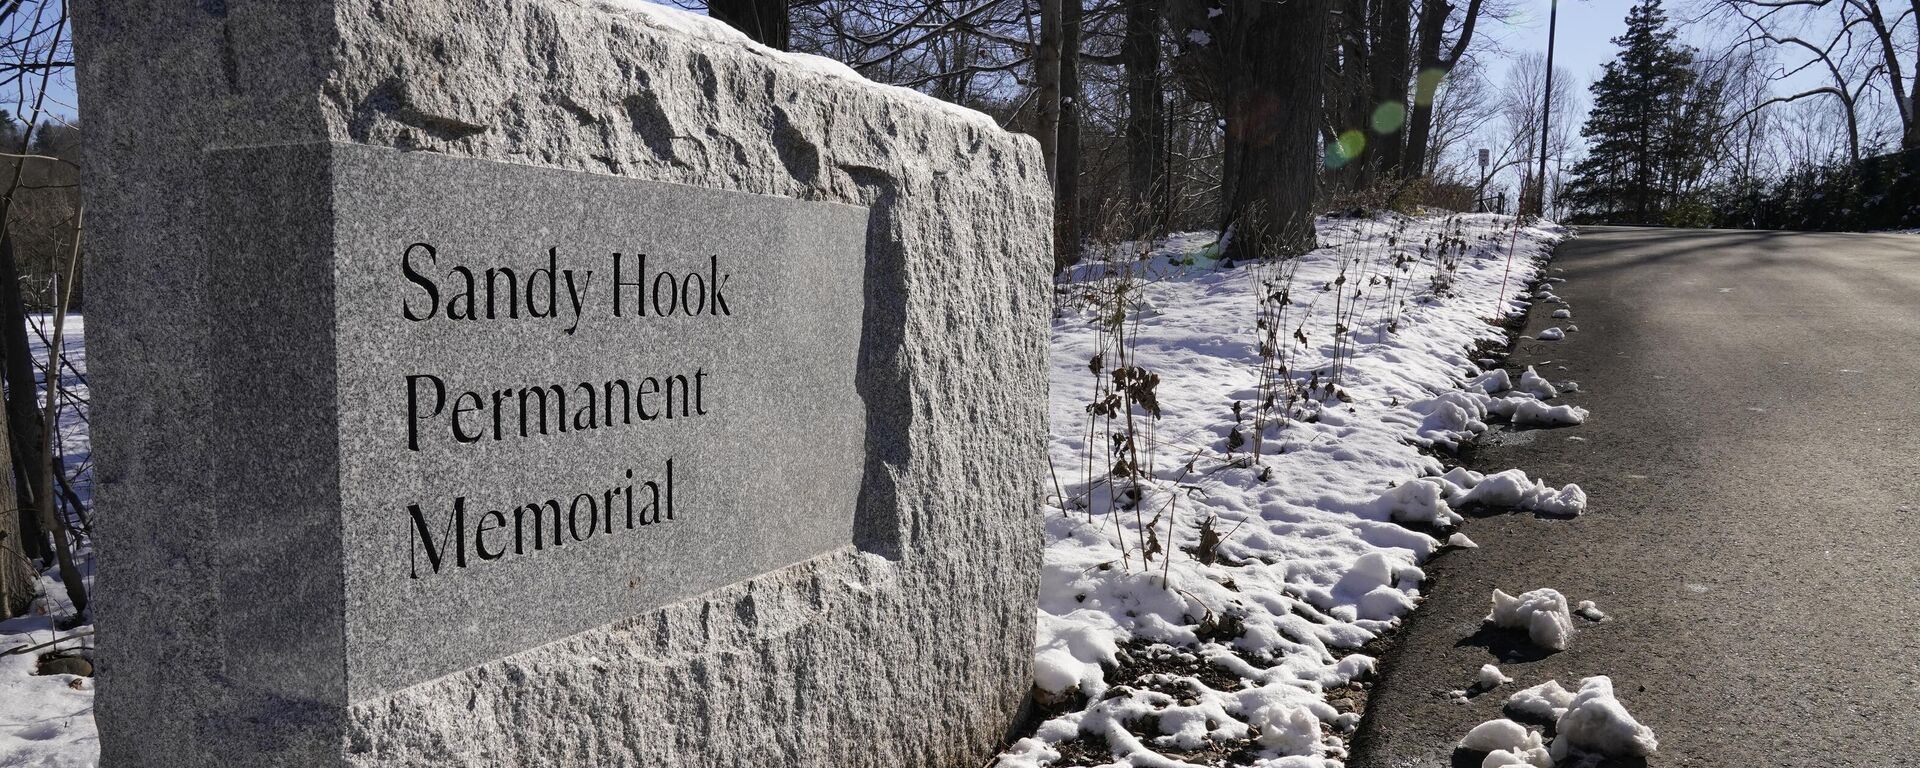 A plaque at the entrance to the The Sandy Hook Permanent Memorial in Newtown, Connecticut, on December 13, 2022 - Sputnik International, 1920, 14.12.2022